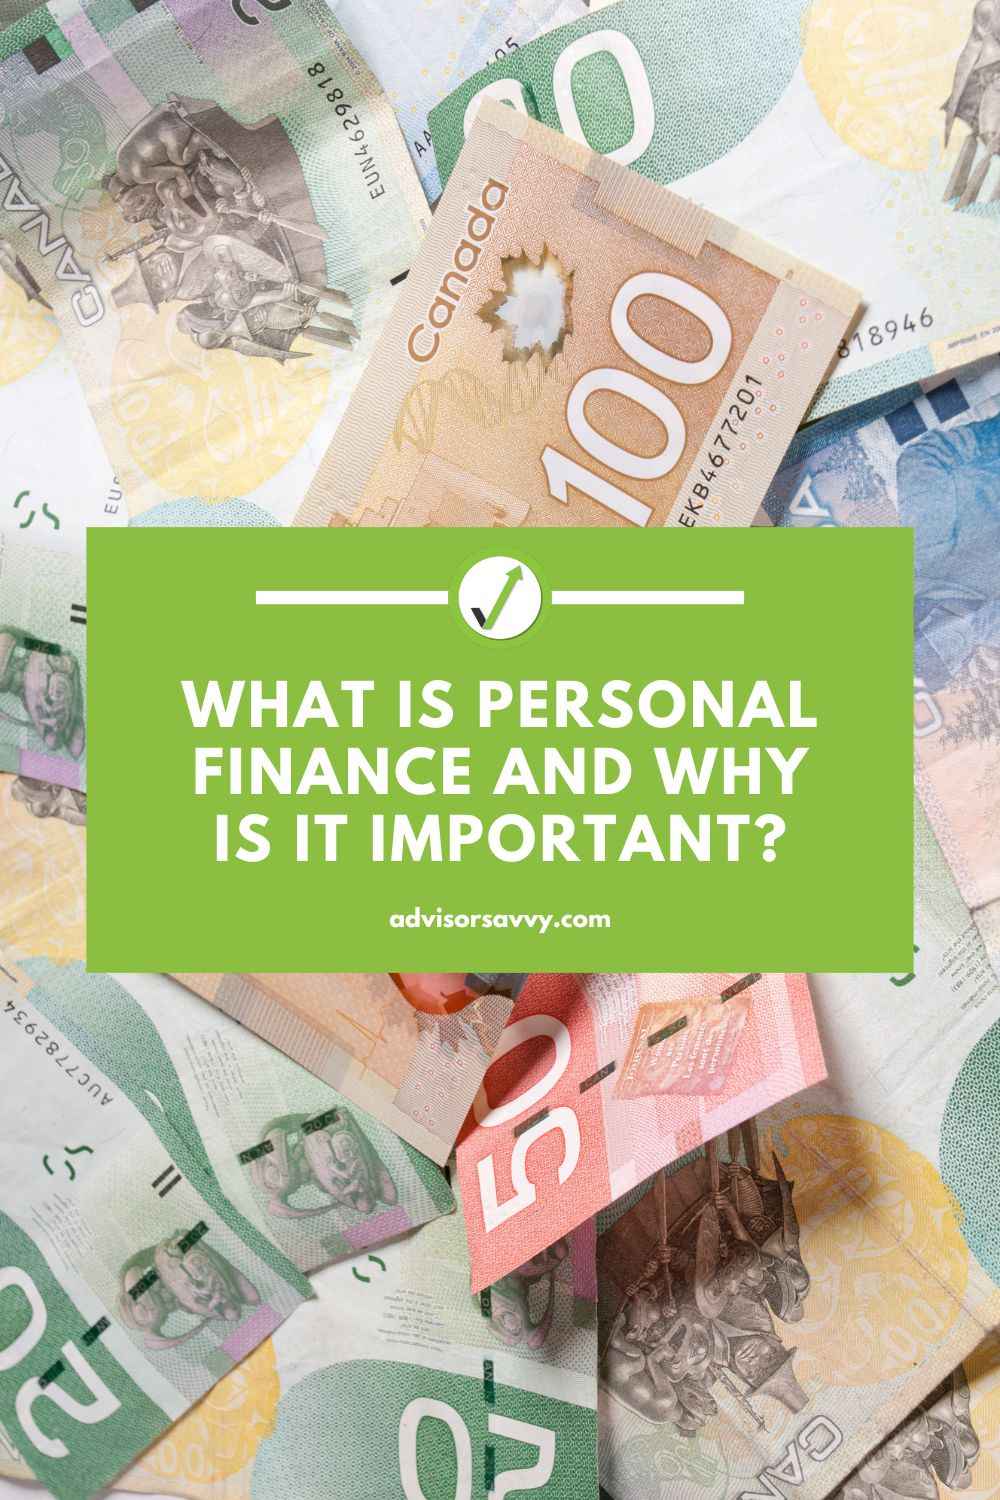 why is personal finance important essay